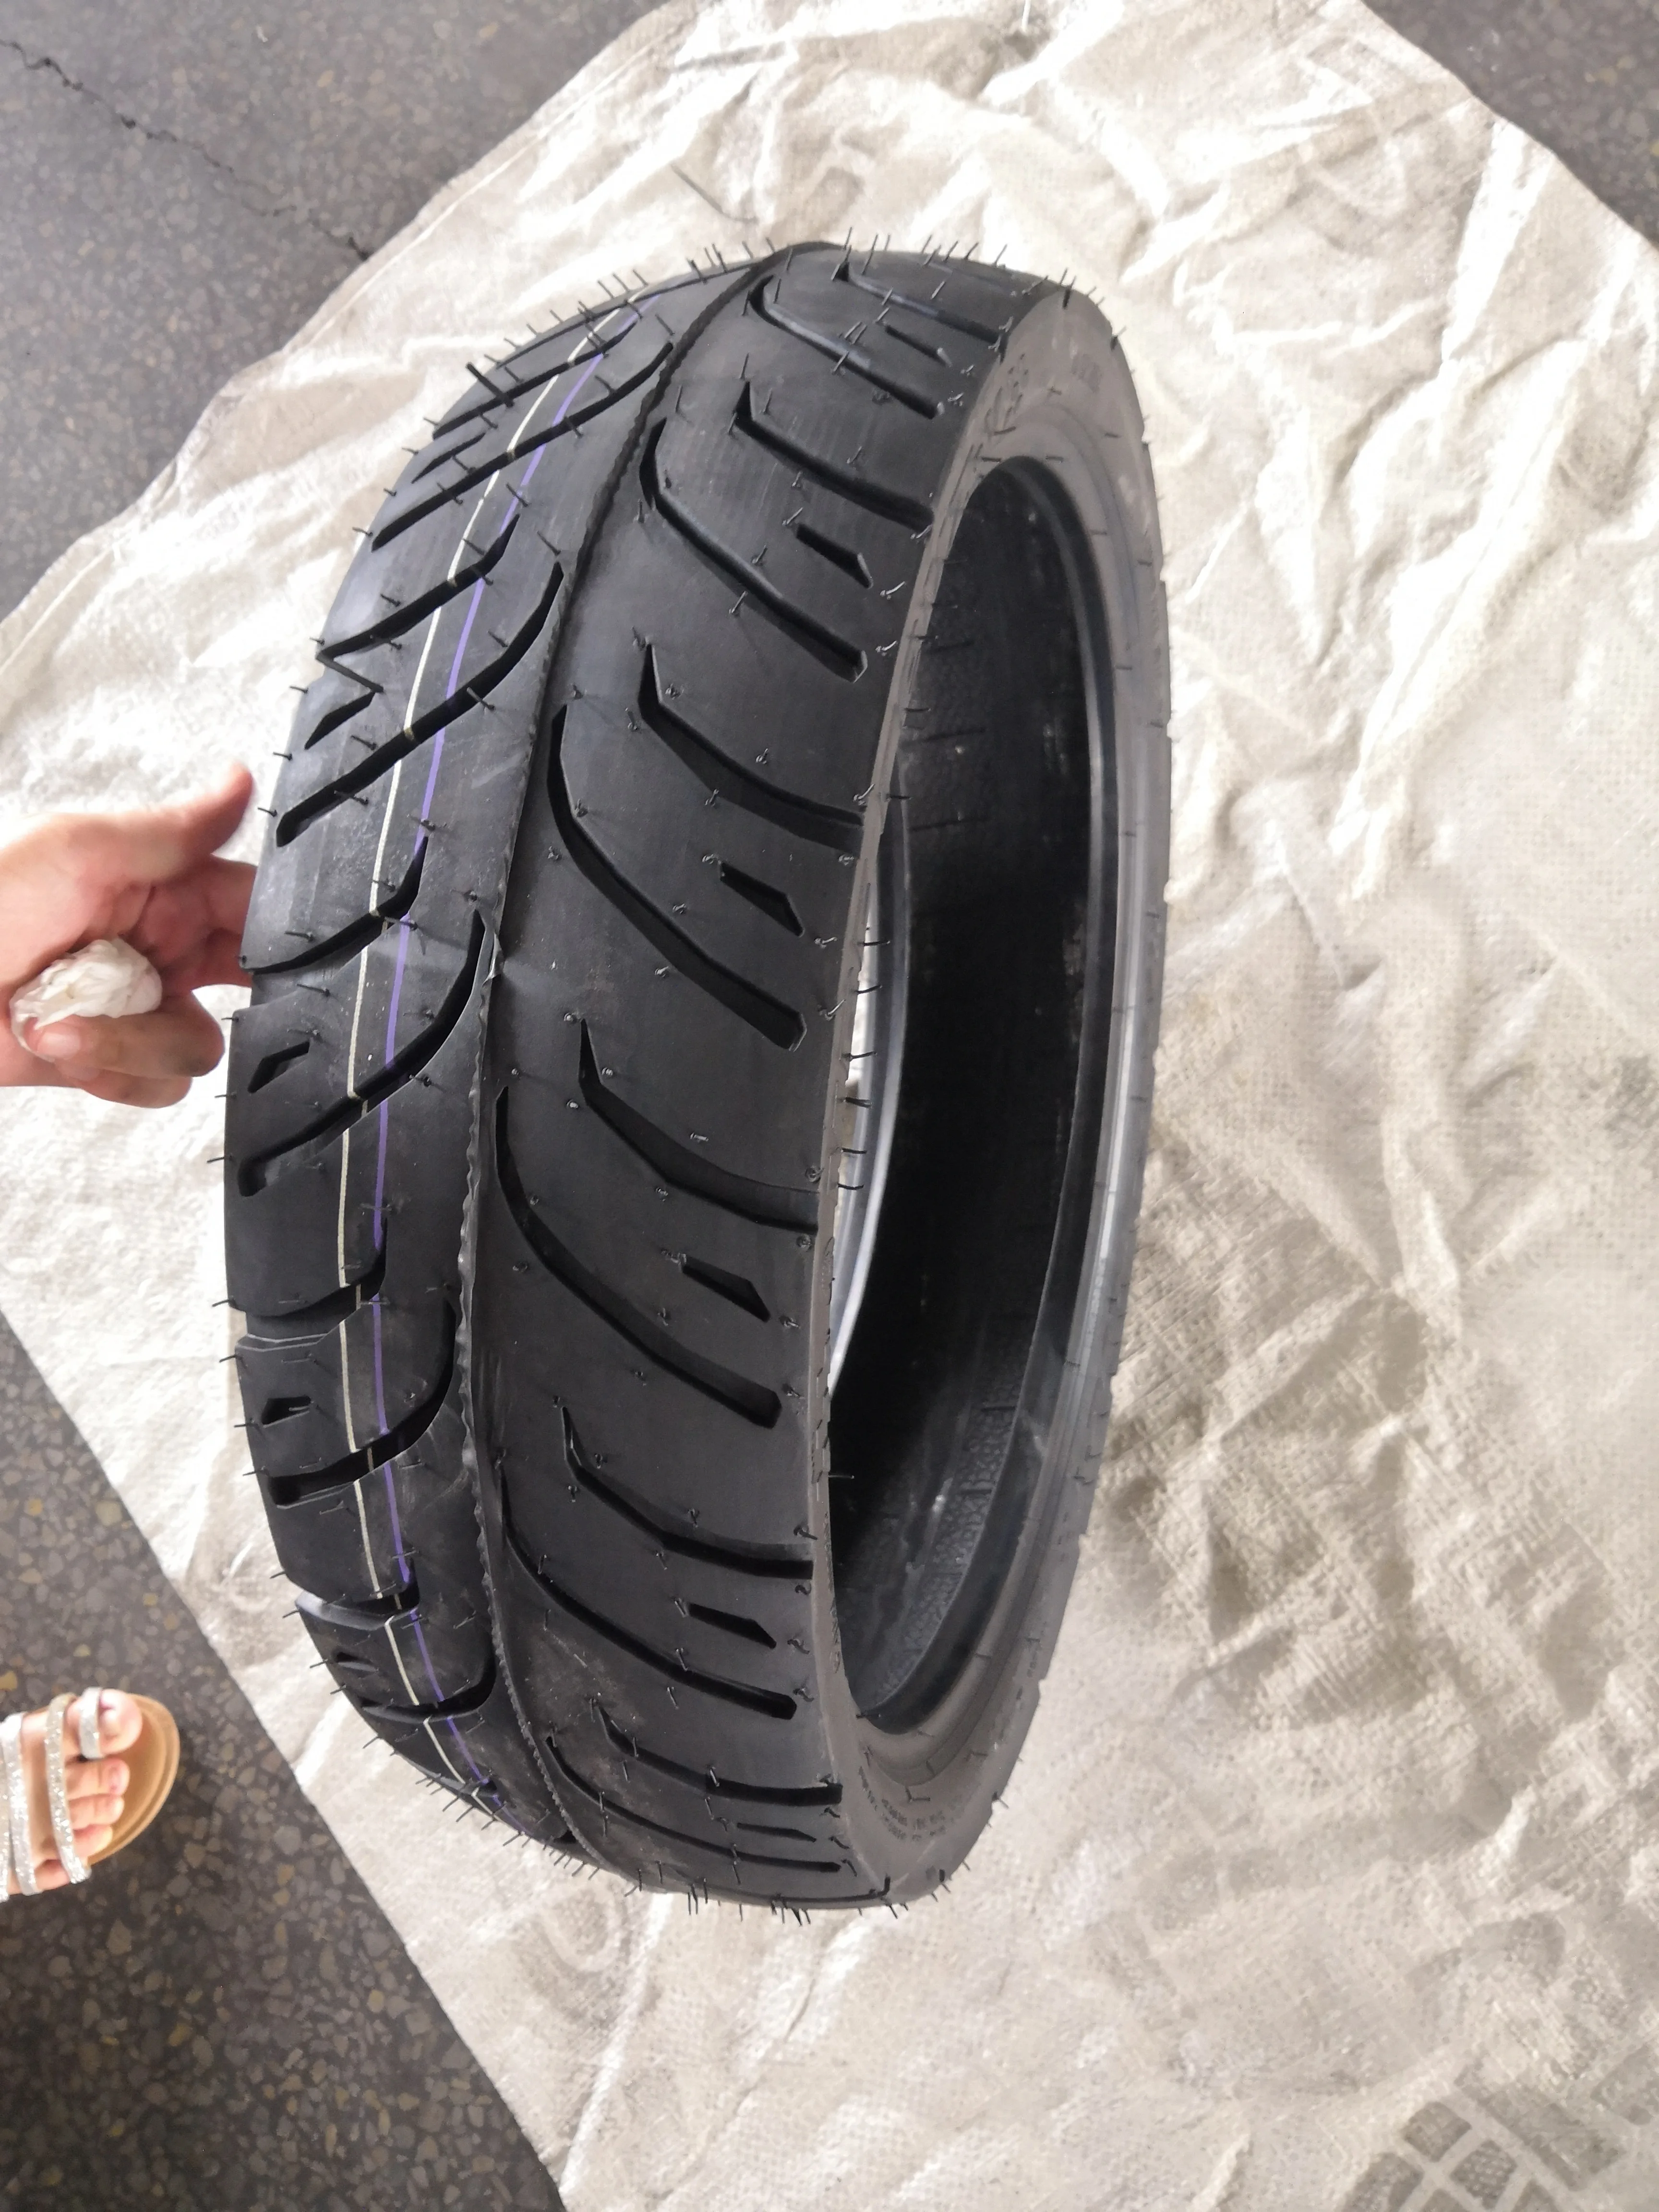 Good Quality Mrf 140 60 17 Motorcycle Tire Tricycle Tire Buy Motorcycle Tire 140 60 17 Tyres 140 60 17 China Motorcycle Tyre Product On Alibaba Com